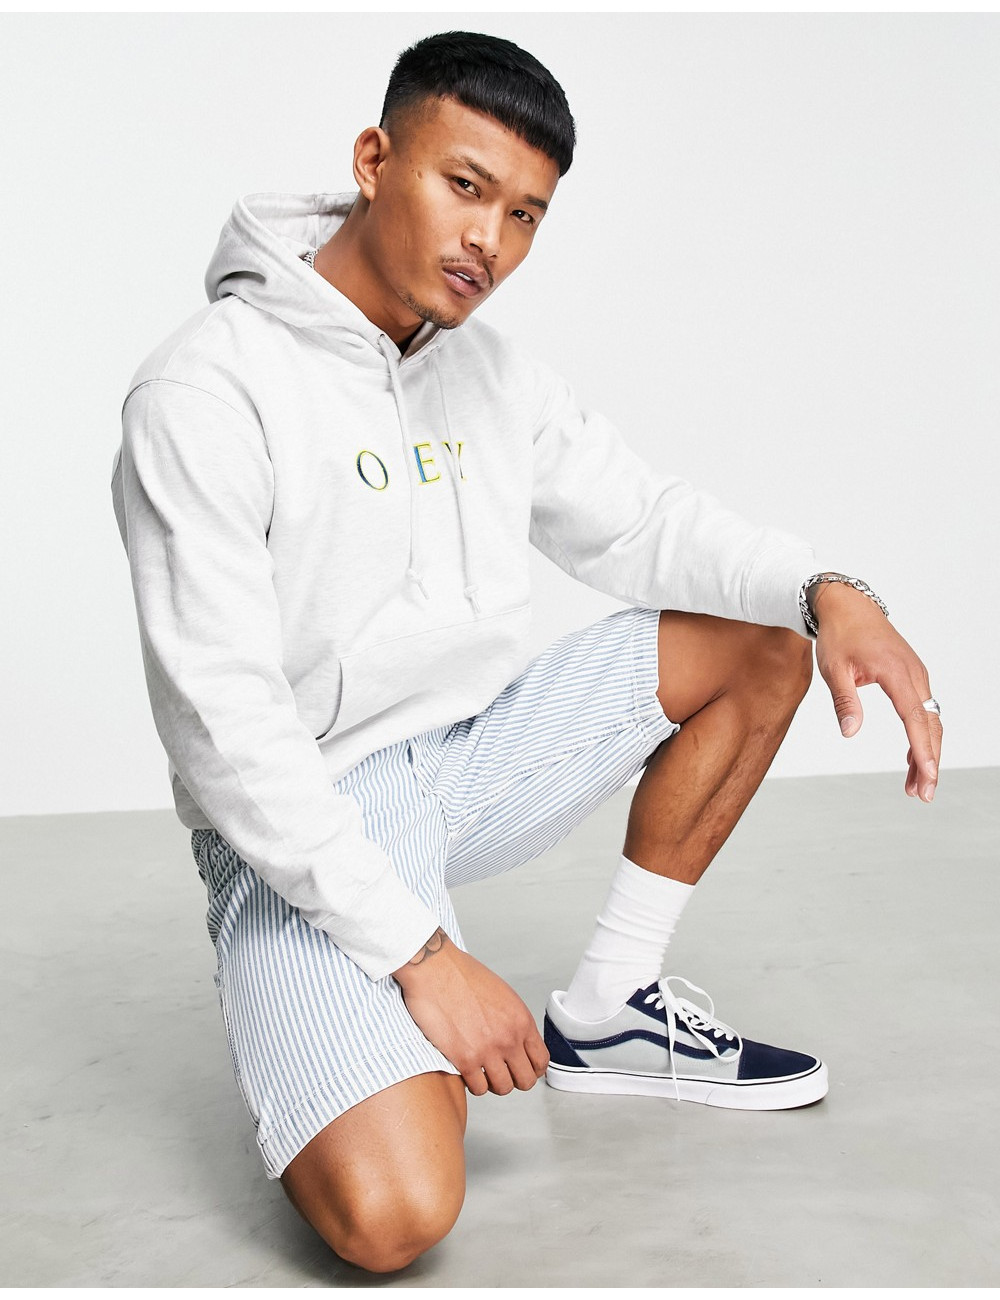 Obey nouvelle iv hoodie in...